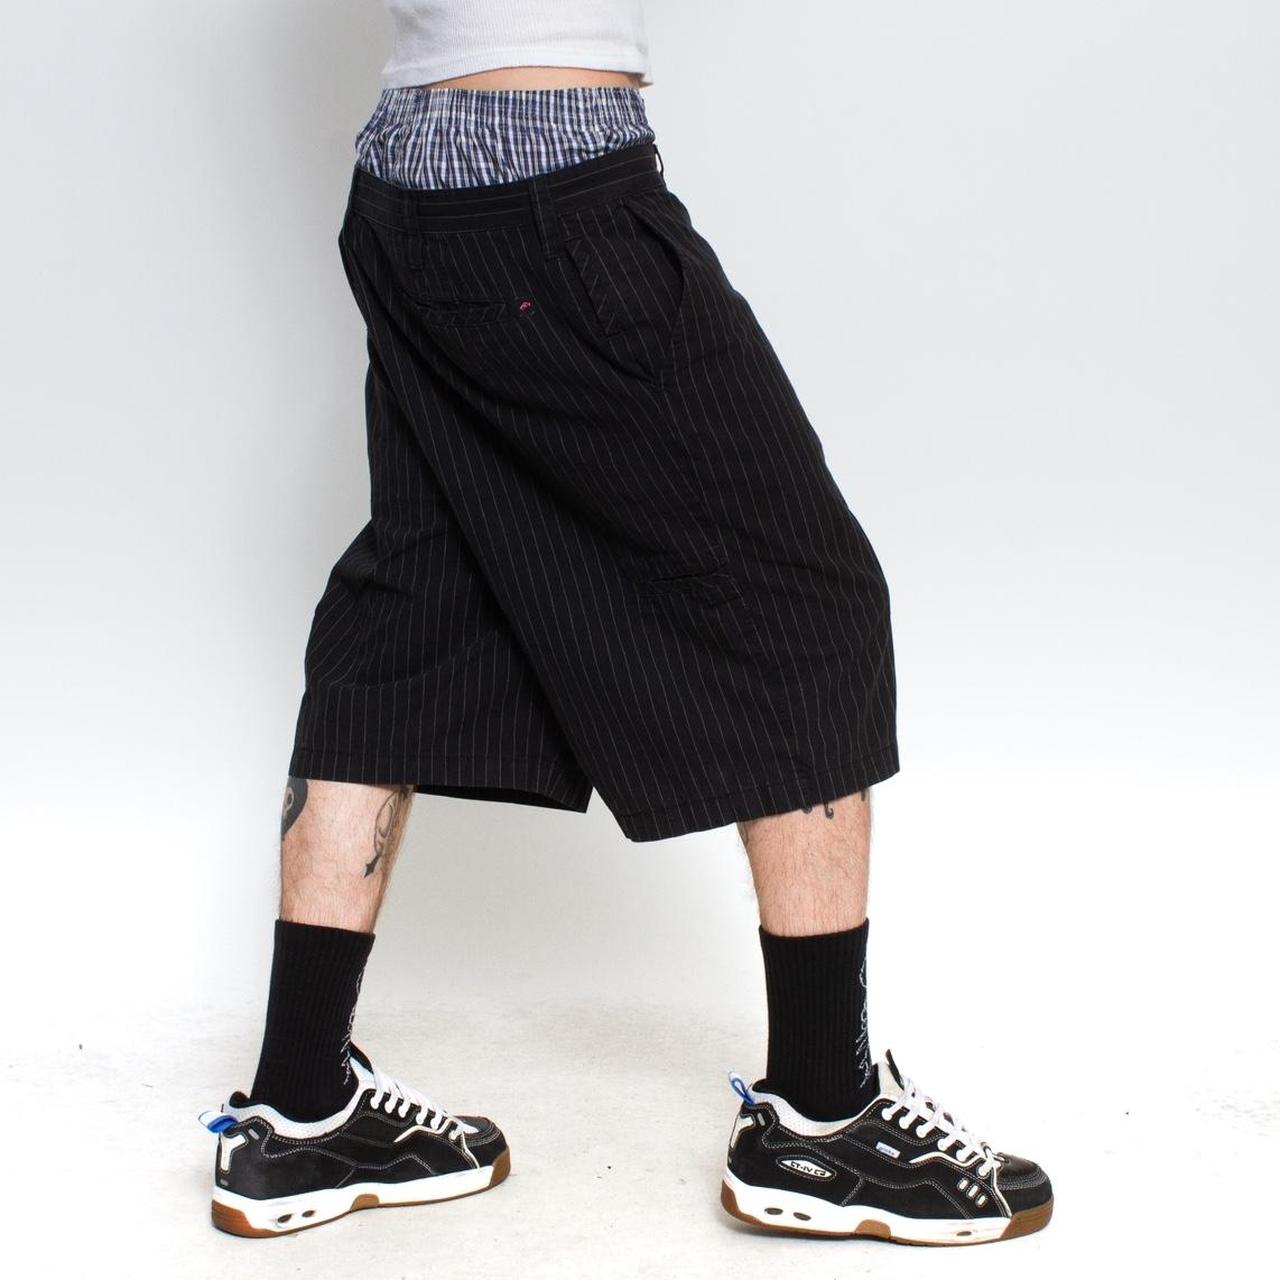 Hawke & Co. Men's Black and White Shorts (2)